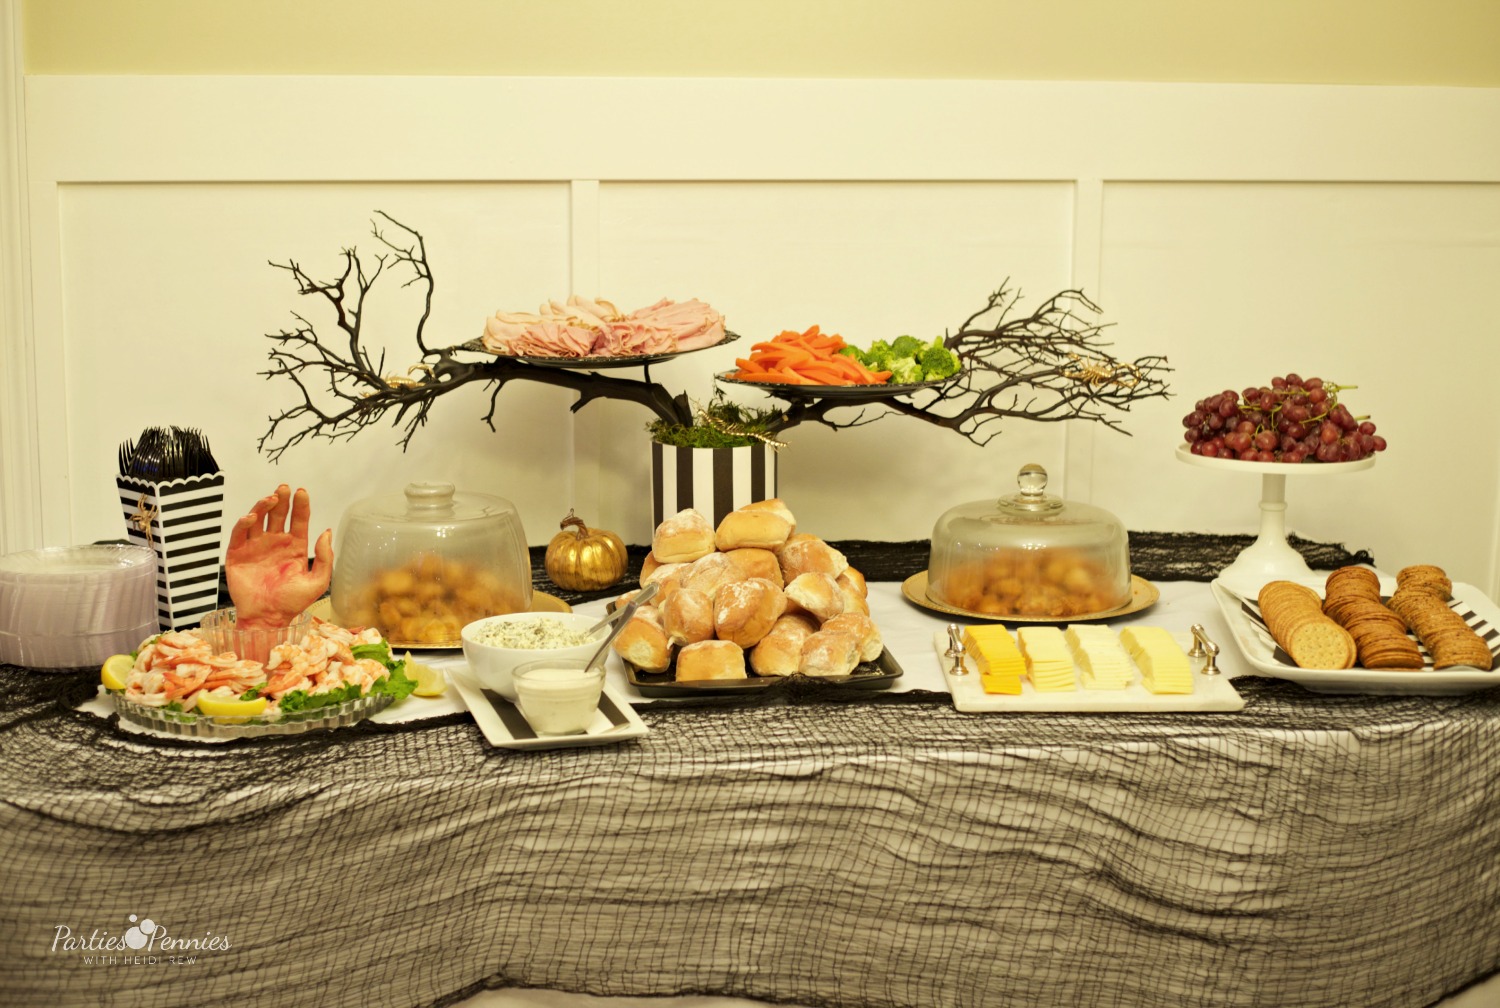  Beetlejuice Halloween Party | PartiesforPennies.com | Savory Table